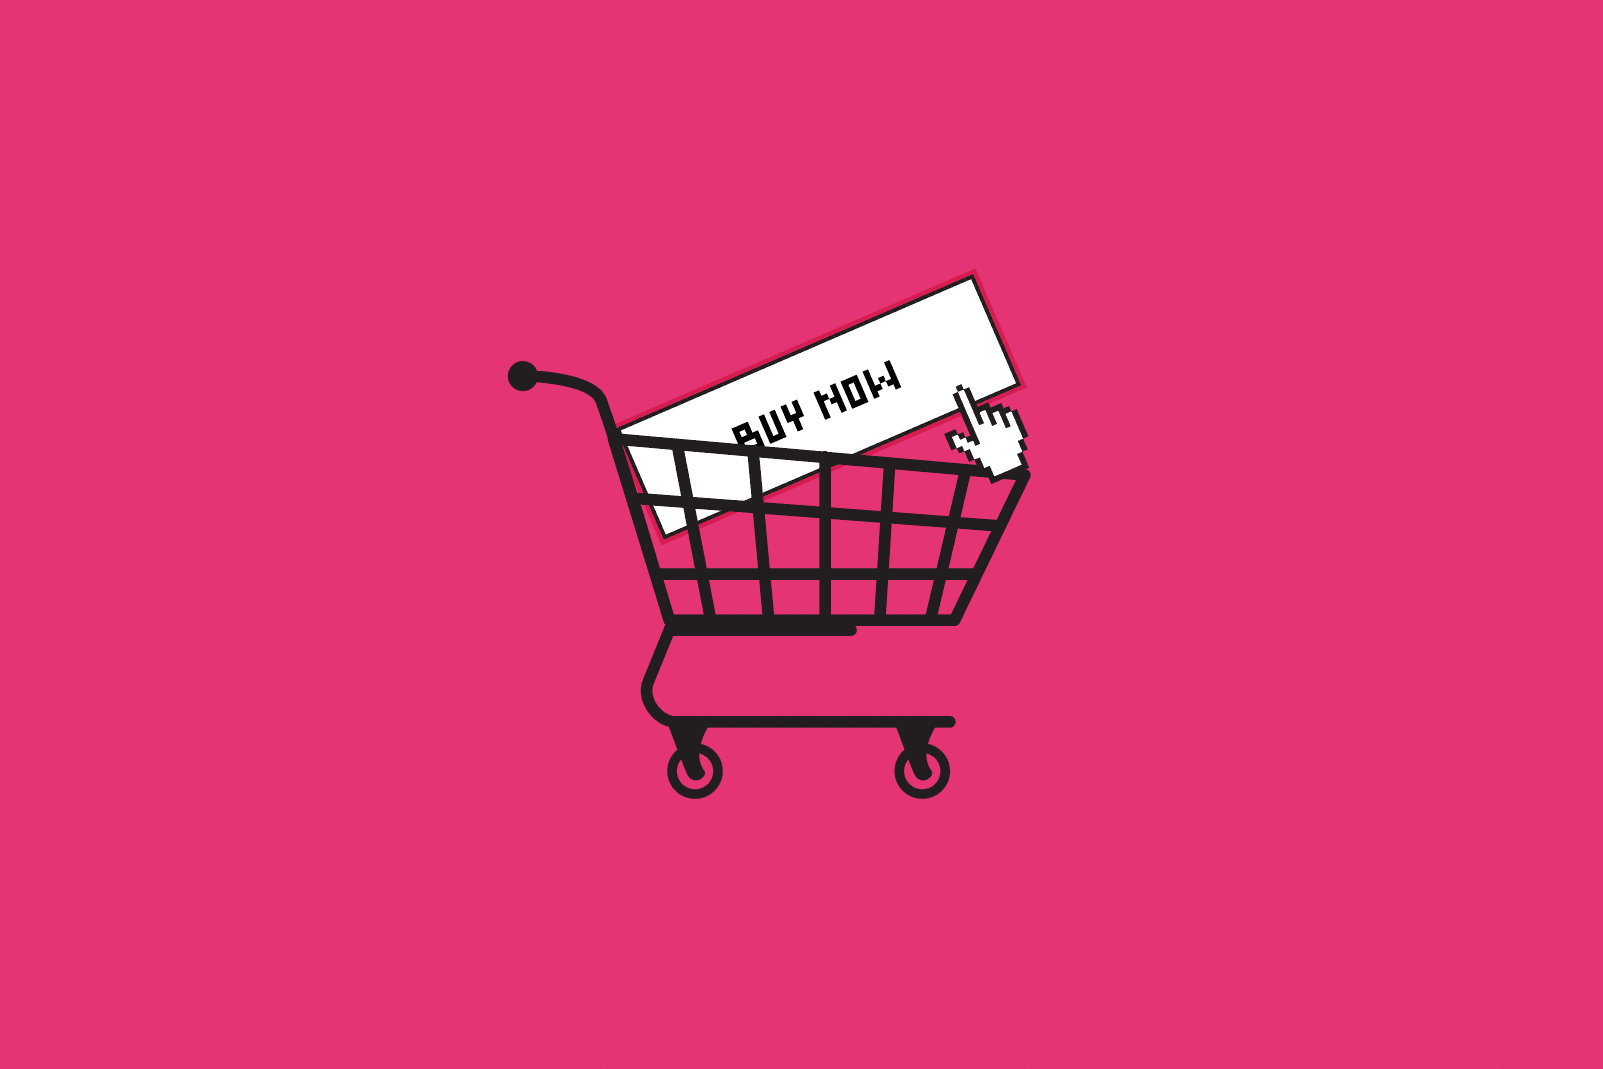 Buy now note in shopping cart on pink background